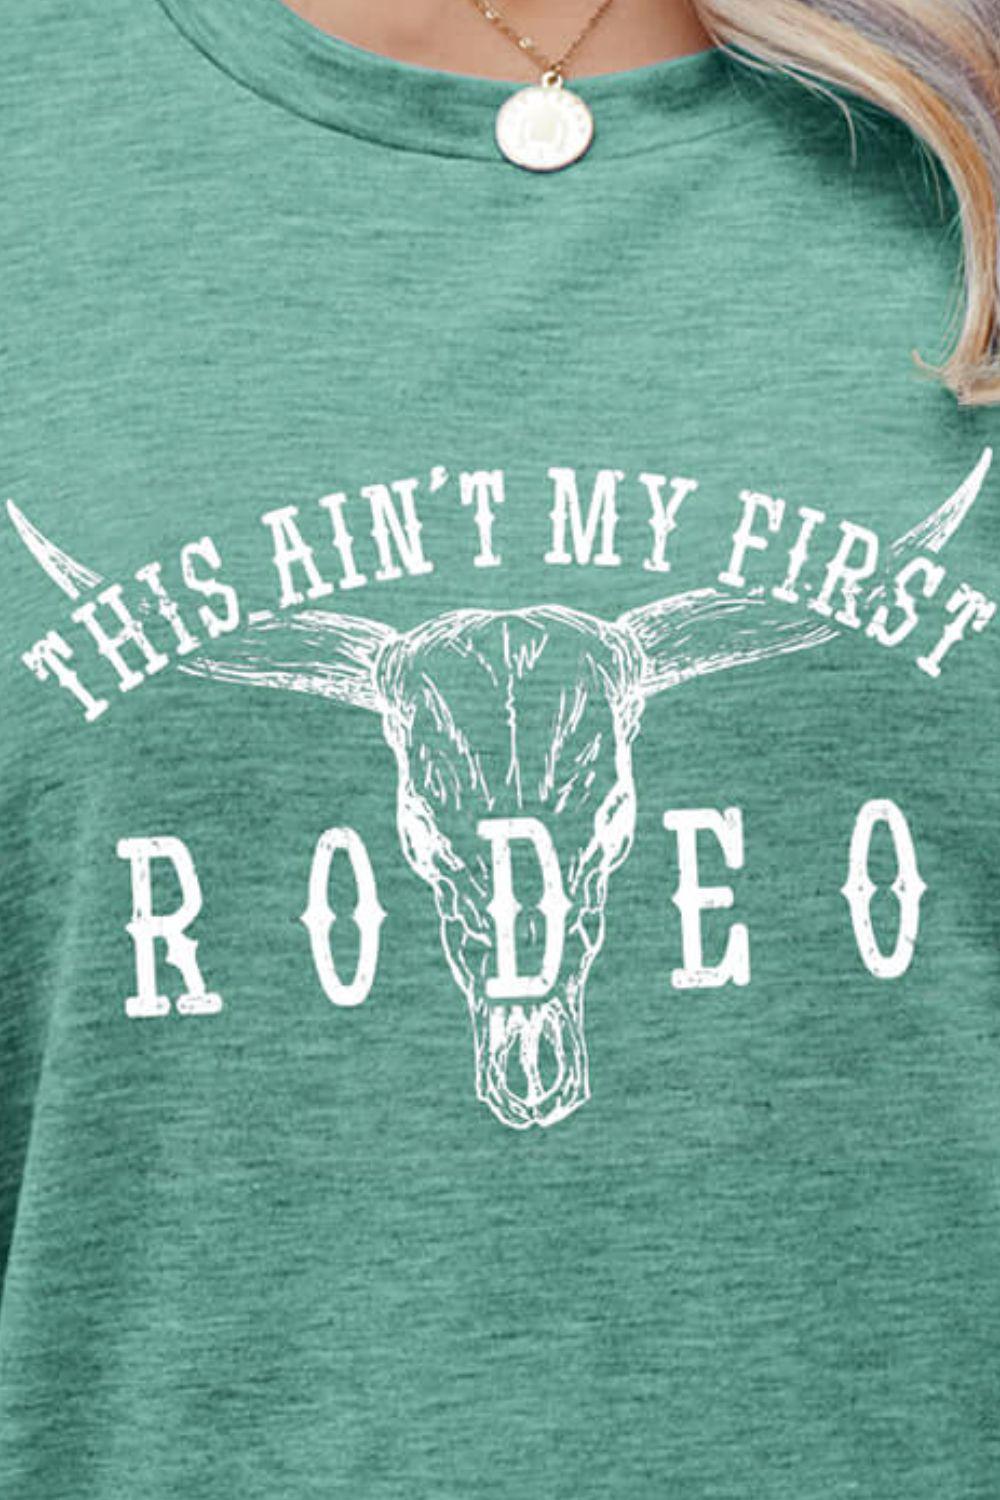 THIS AIN'T MY FIRST RODEO Tee Shirt BLUE ZONE PLANET